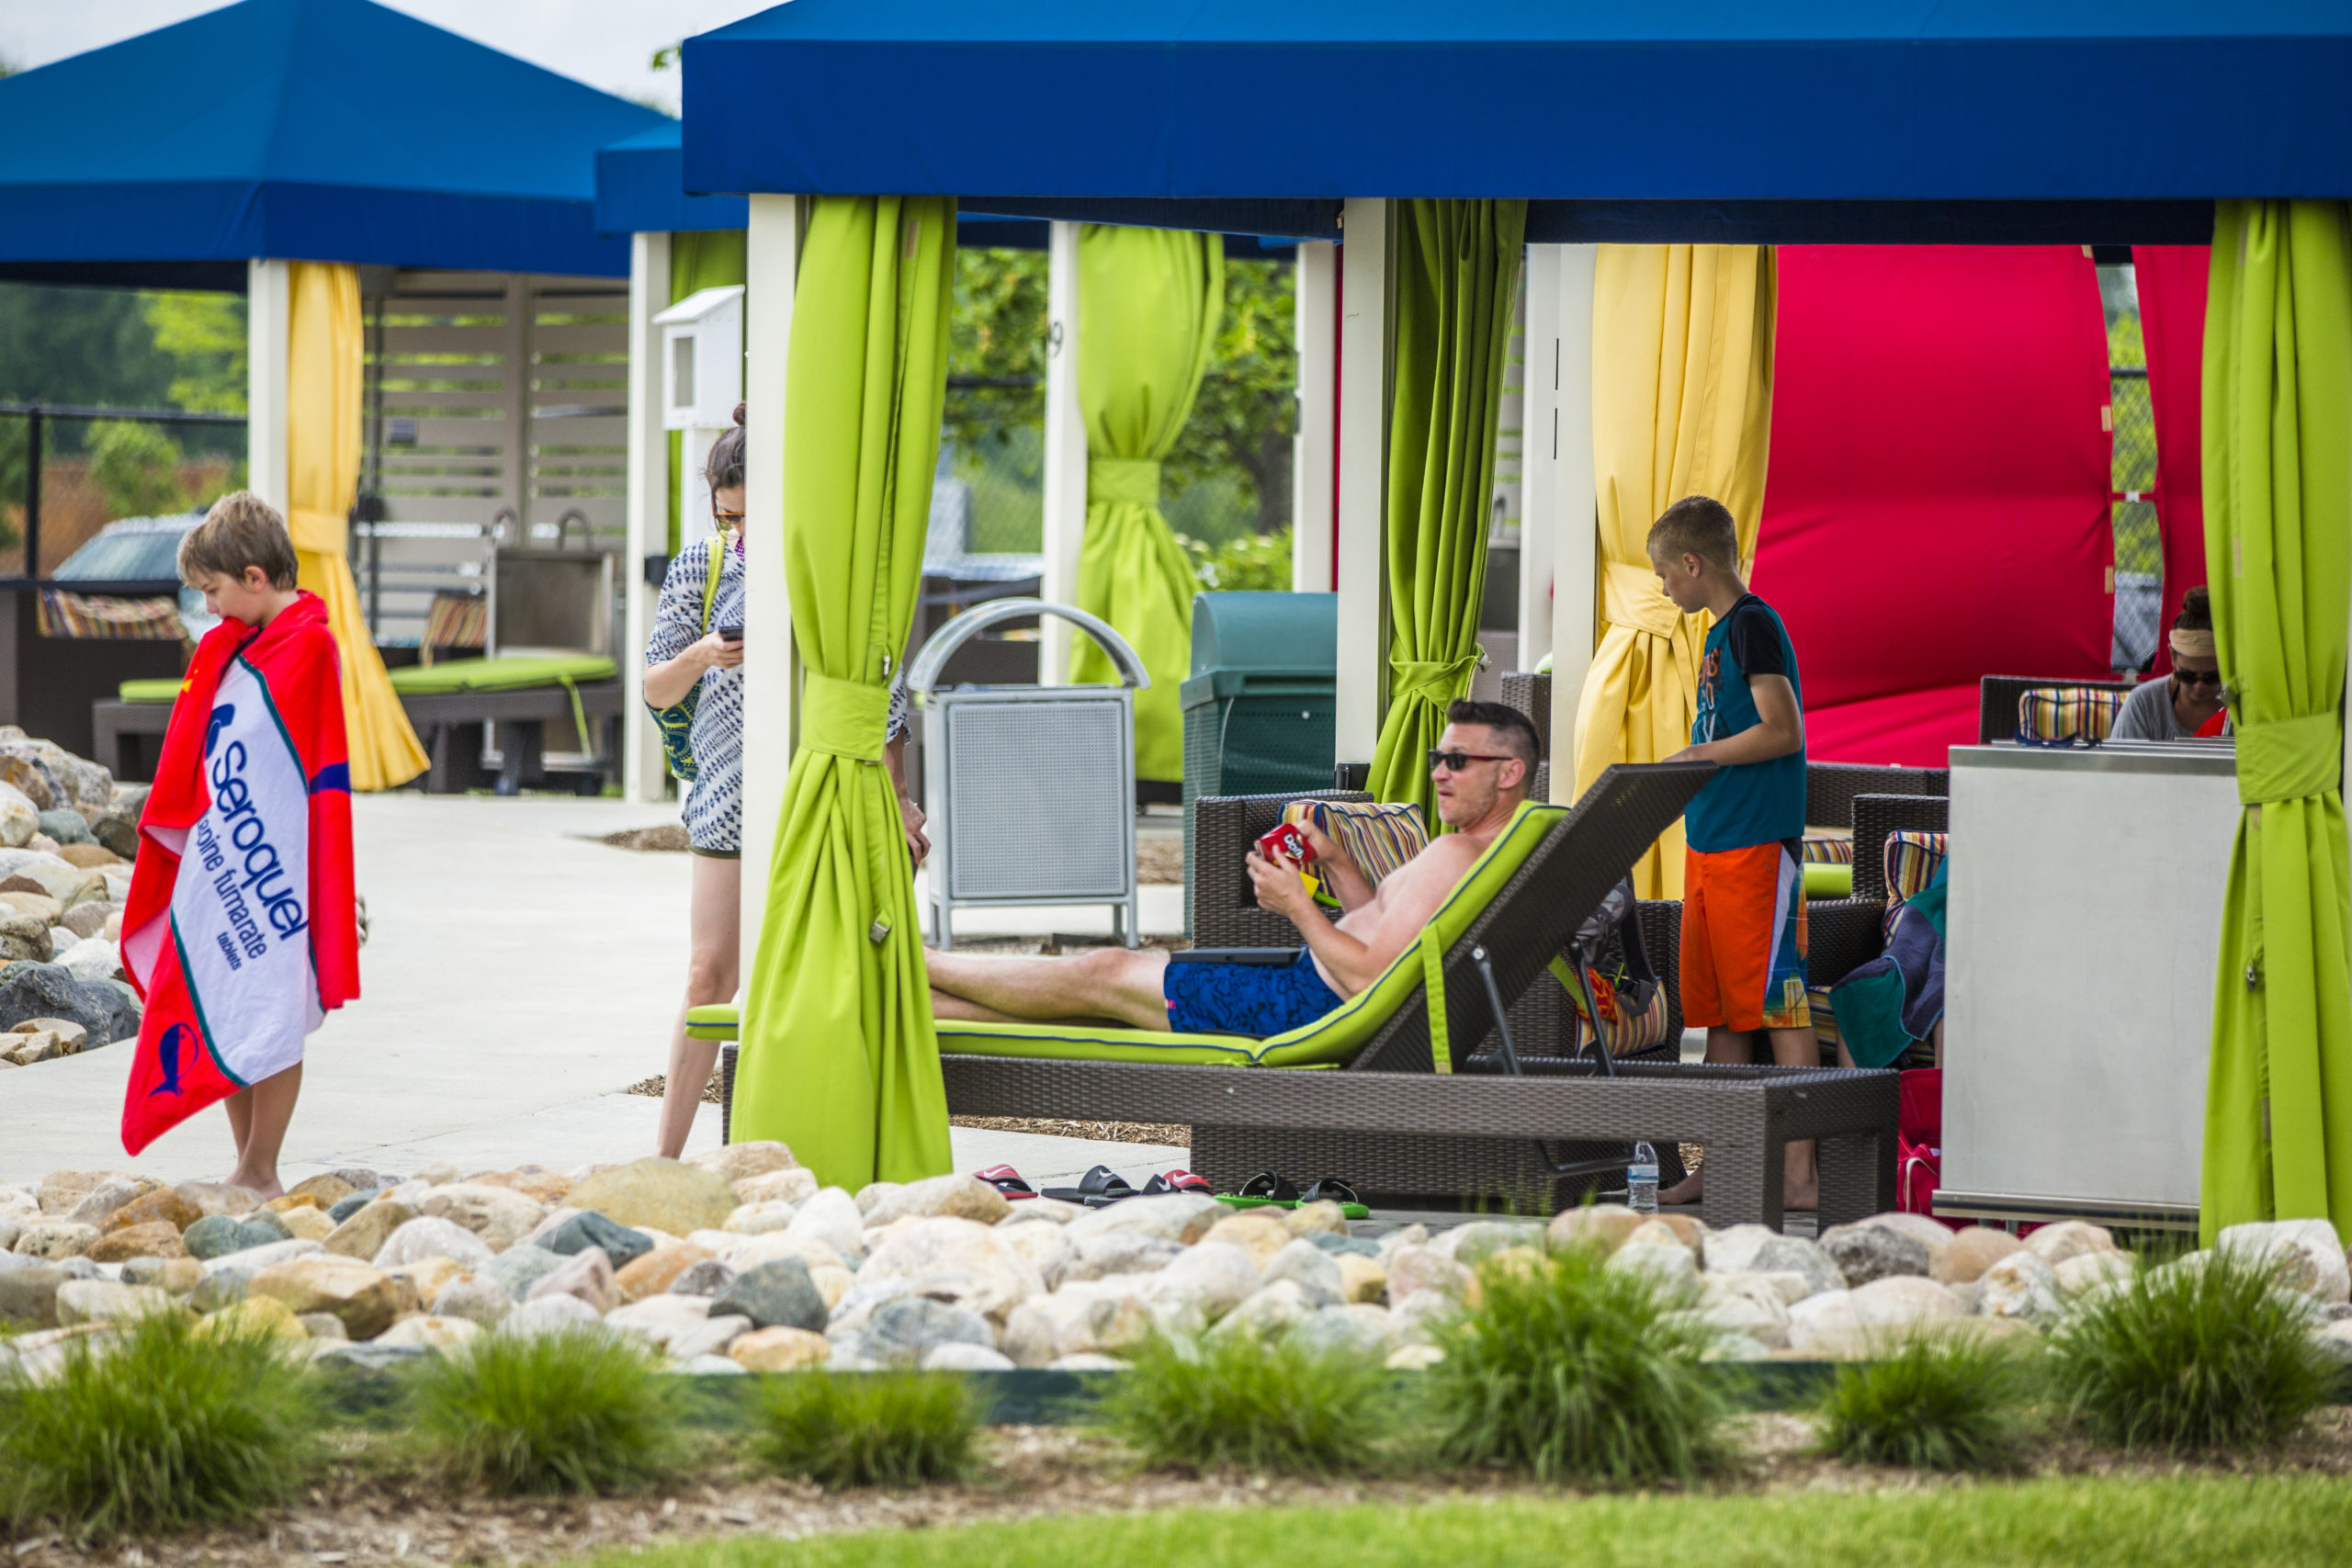 Dad and son relax and lounge in lounge chairs in one of the Waterpark cabanas.